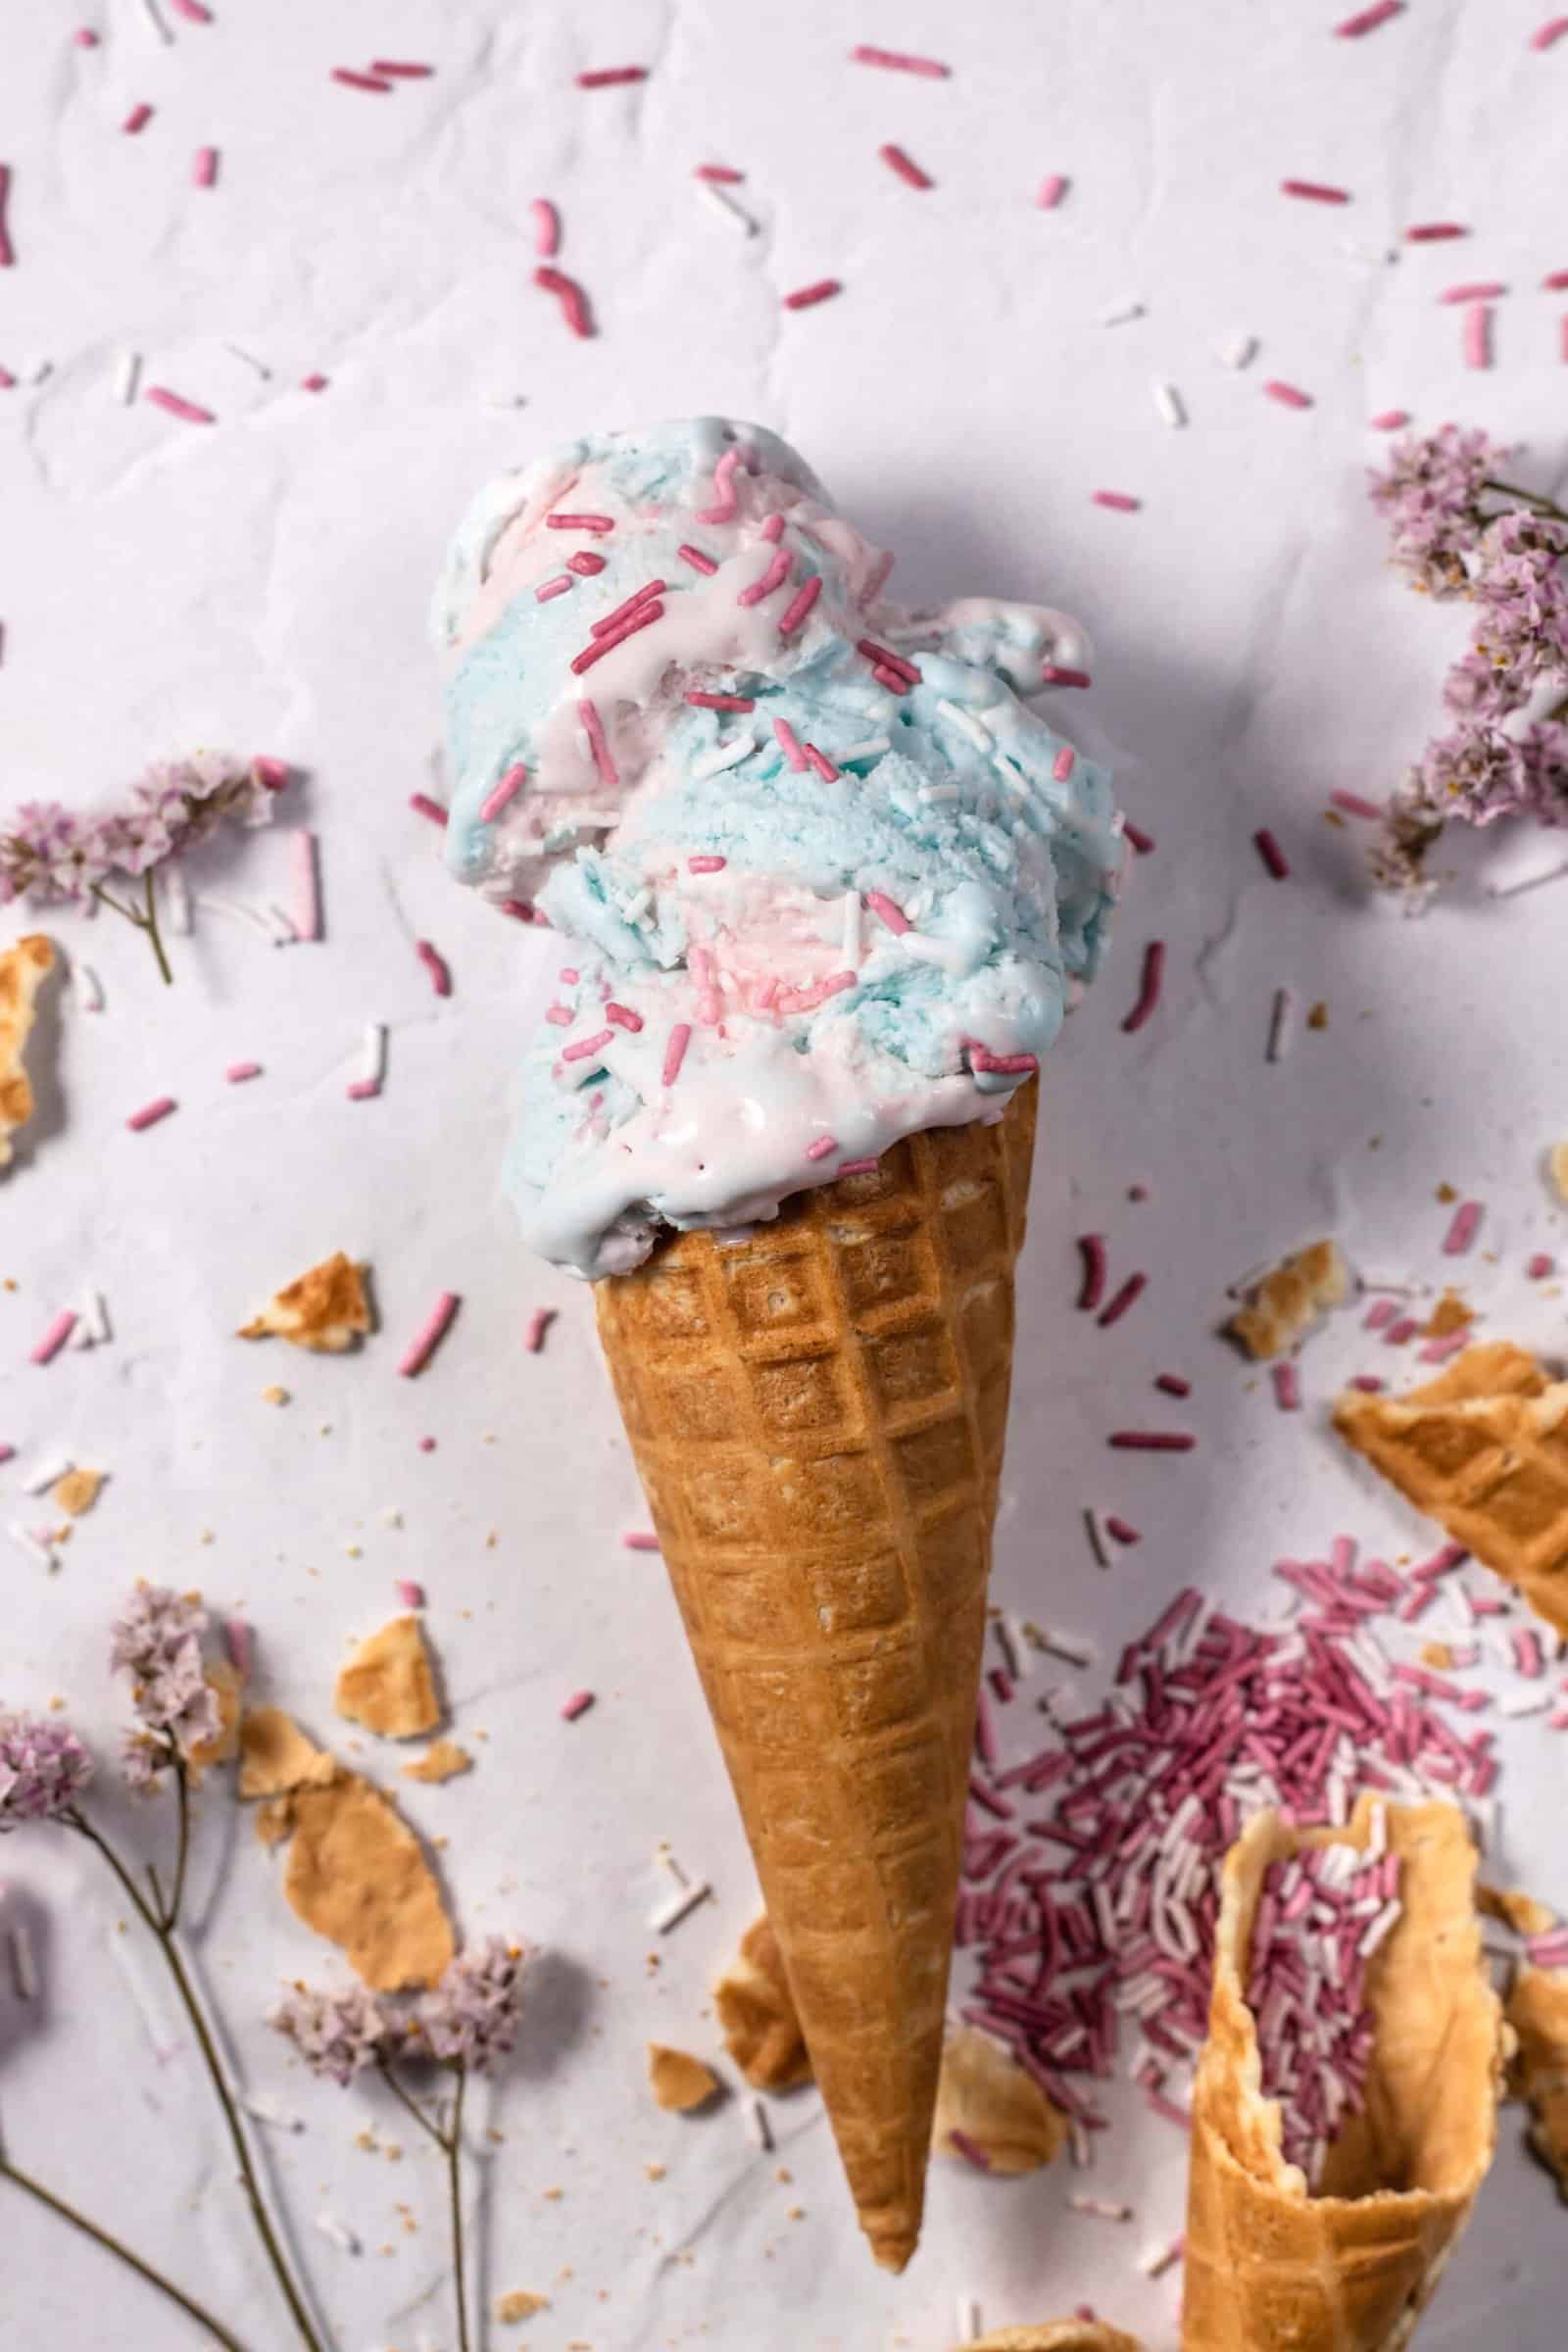 Delicious Pink Ice Cream with Sprinkles in a Waffle Cone on Blue